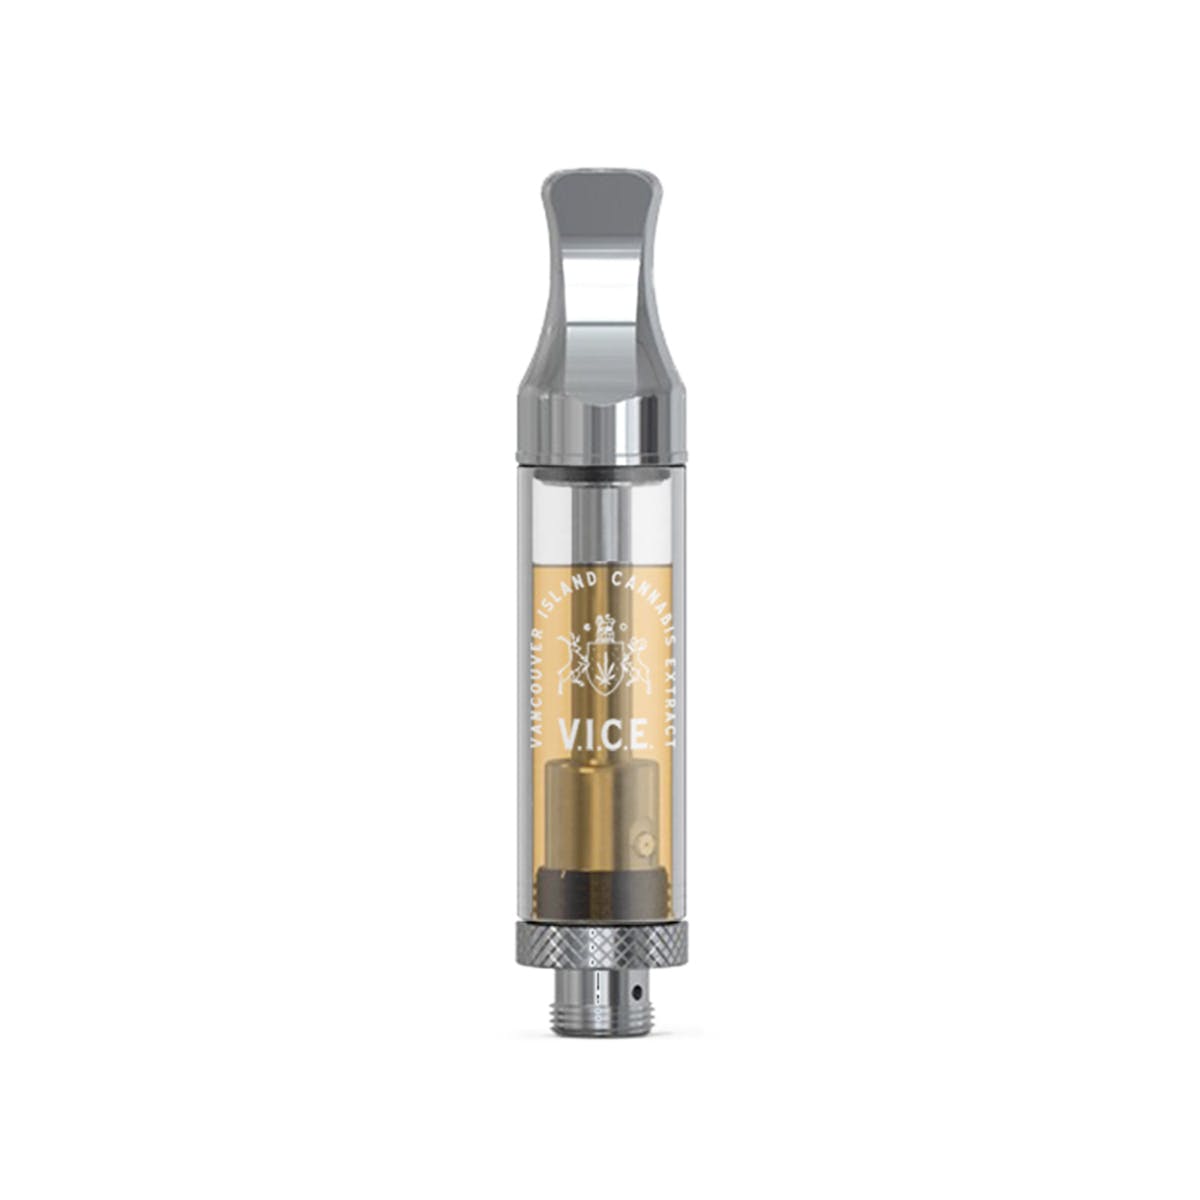 concentrate-vice-vancouver-island-cannabis-extracts-island-haze-pre-filled-cartridge